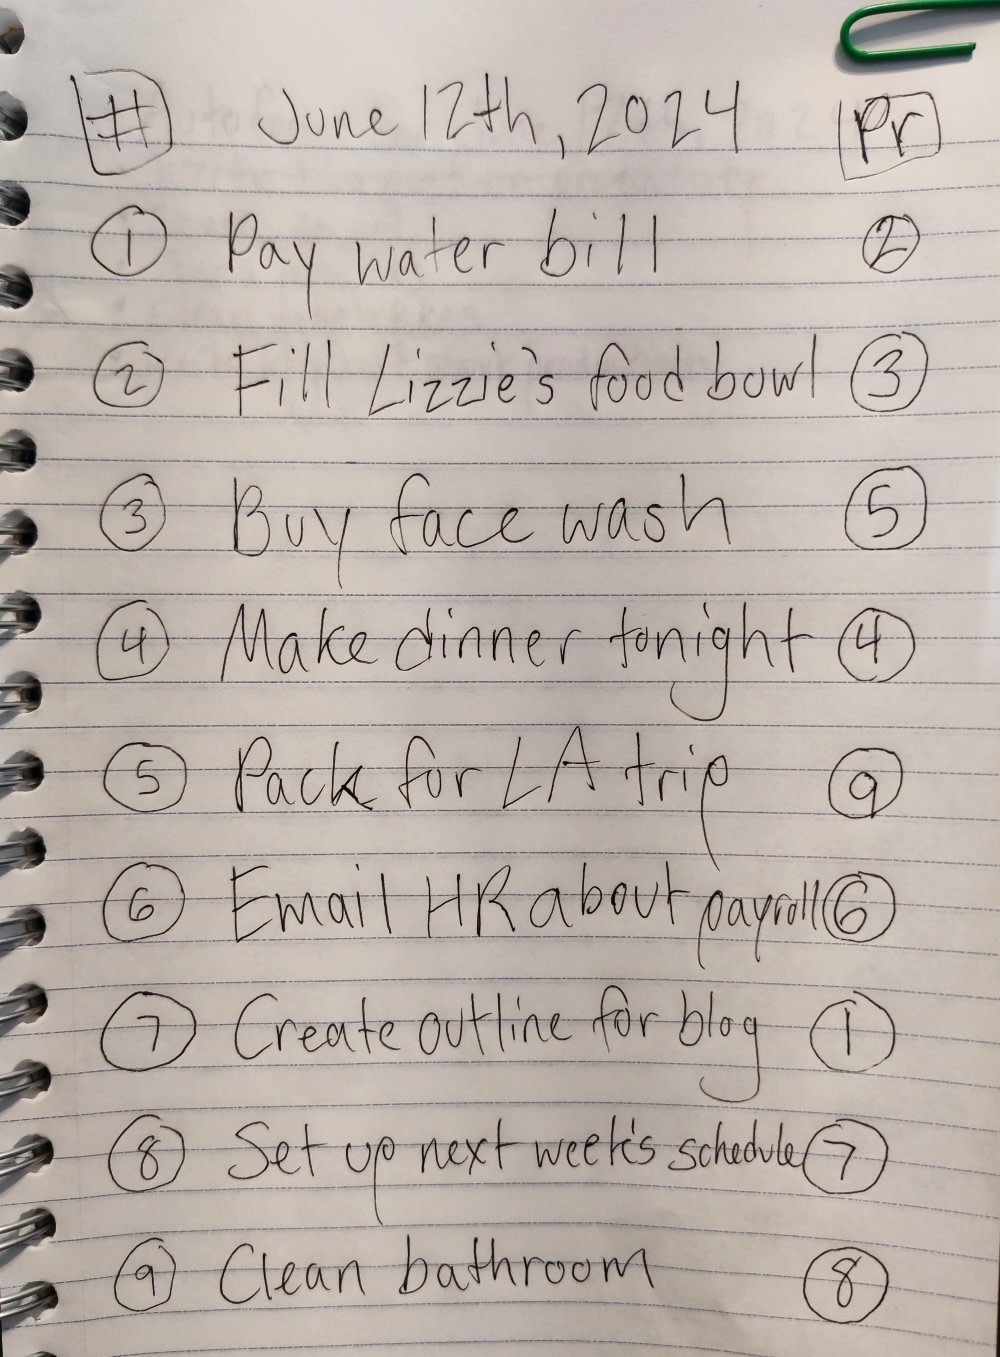 A daily task list on paper